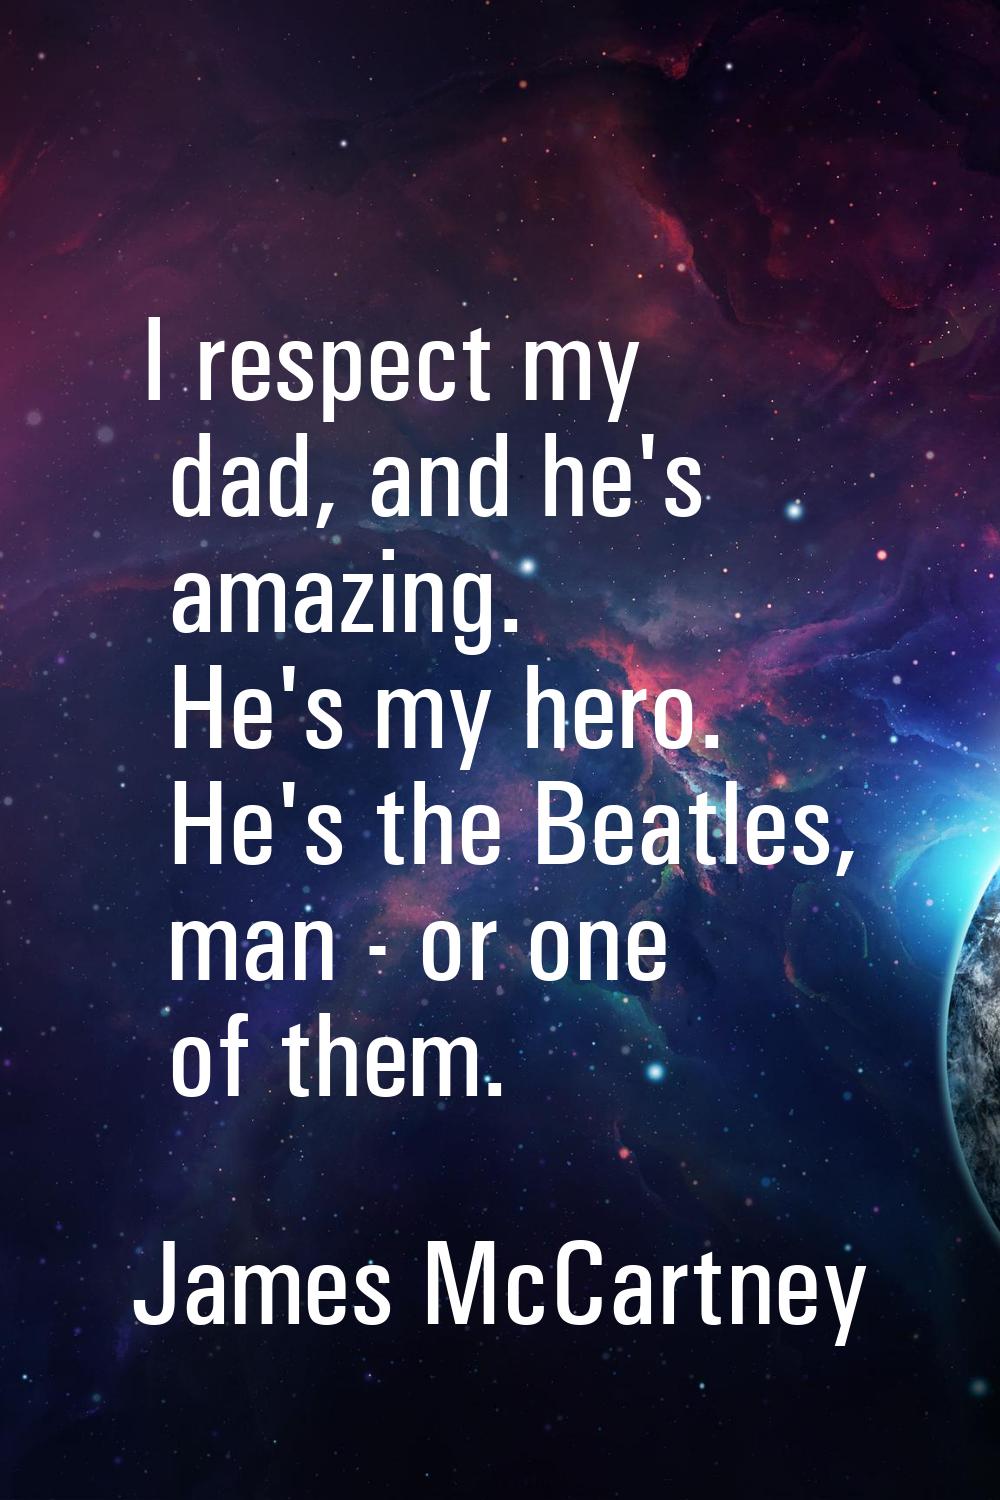 I respect my dad, and he's amazing. He's my hero. He's the Beatles, man - or one of them.